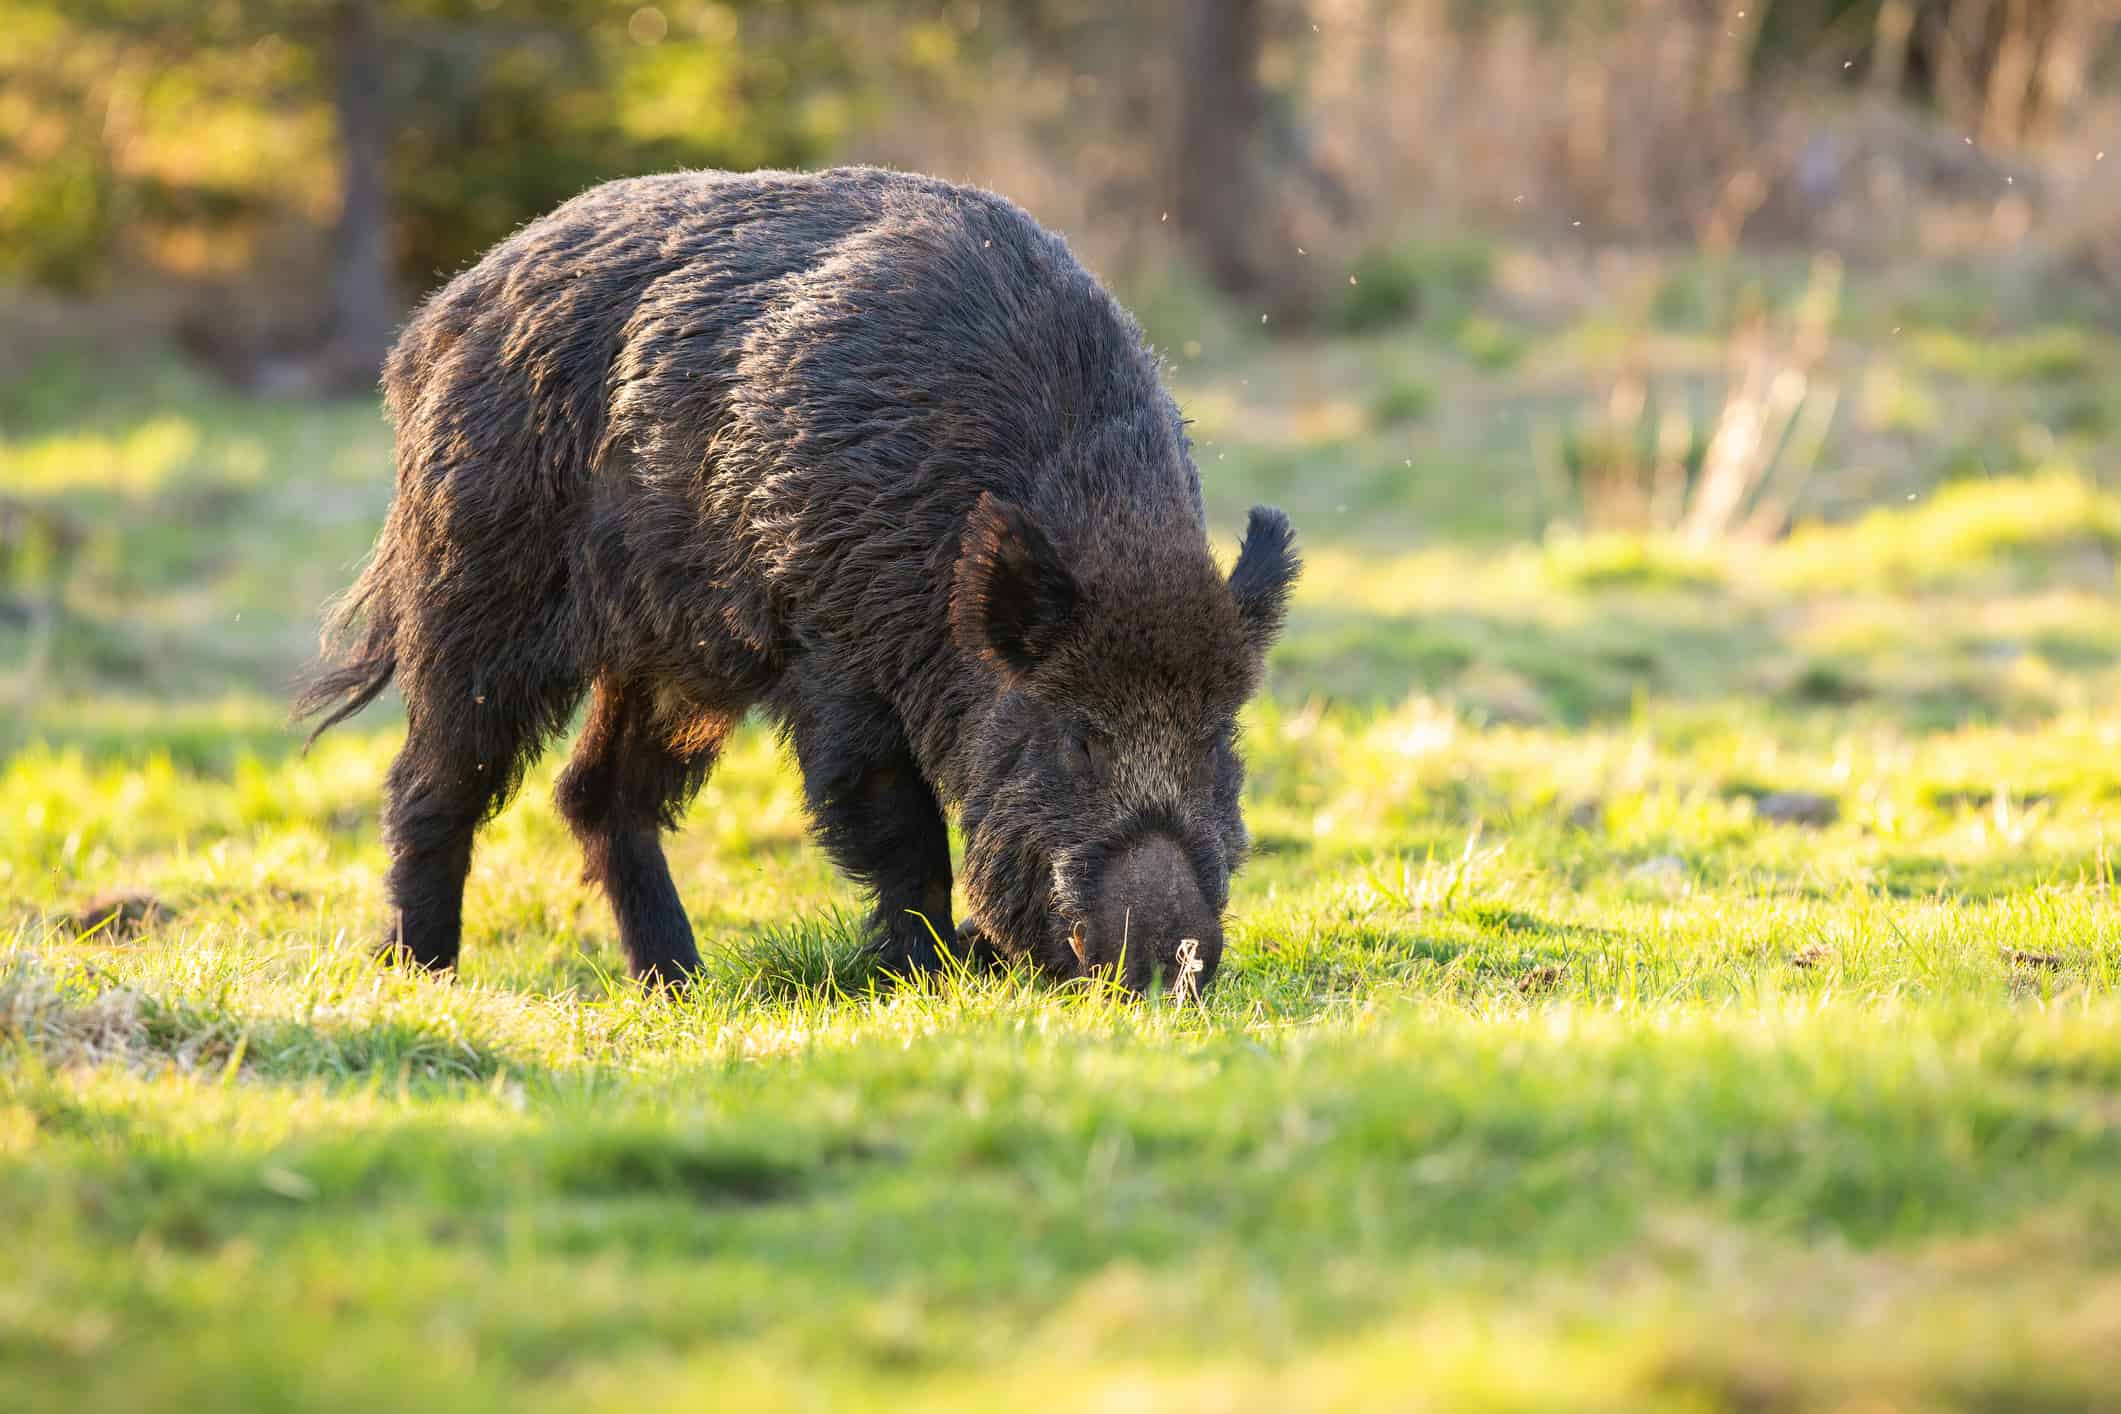 Feral hogs have an exceptional sense of smell